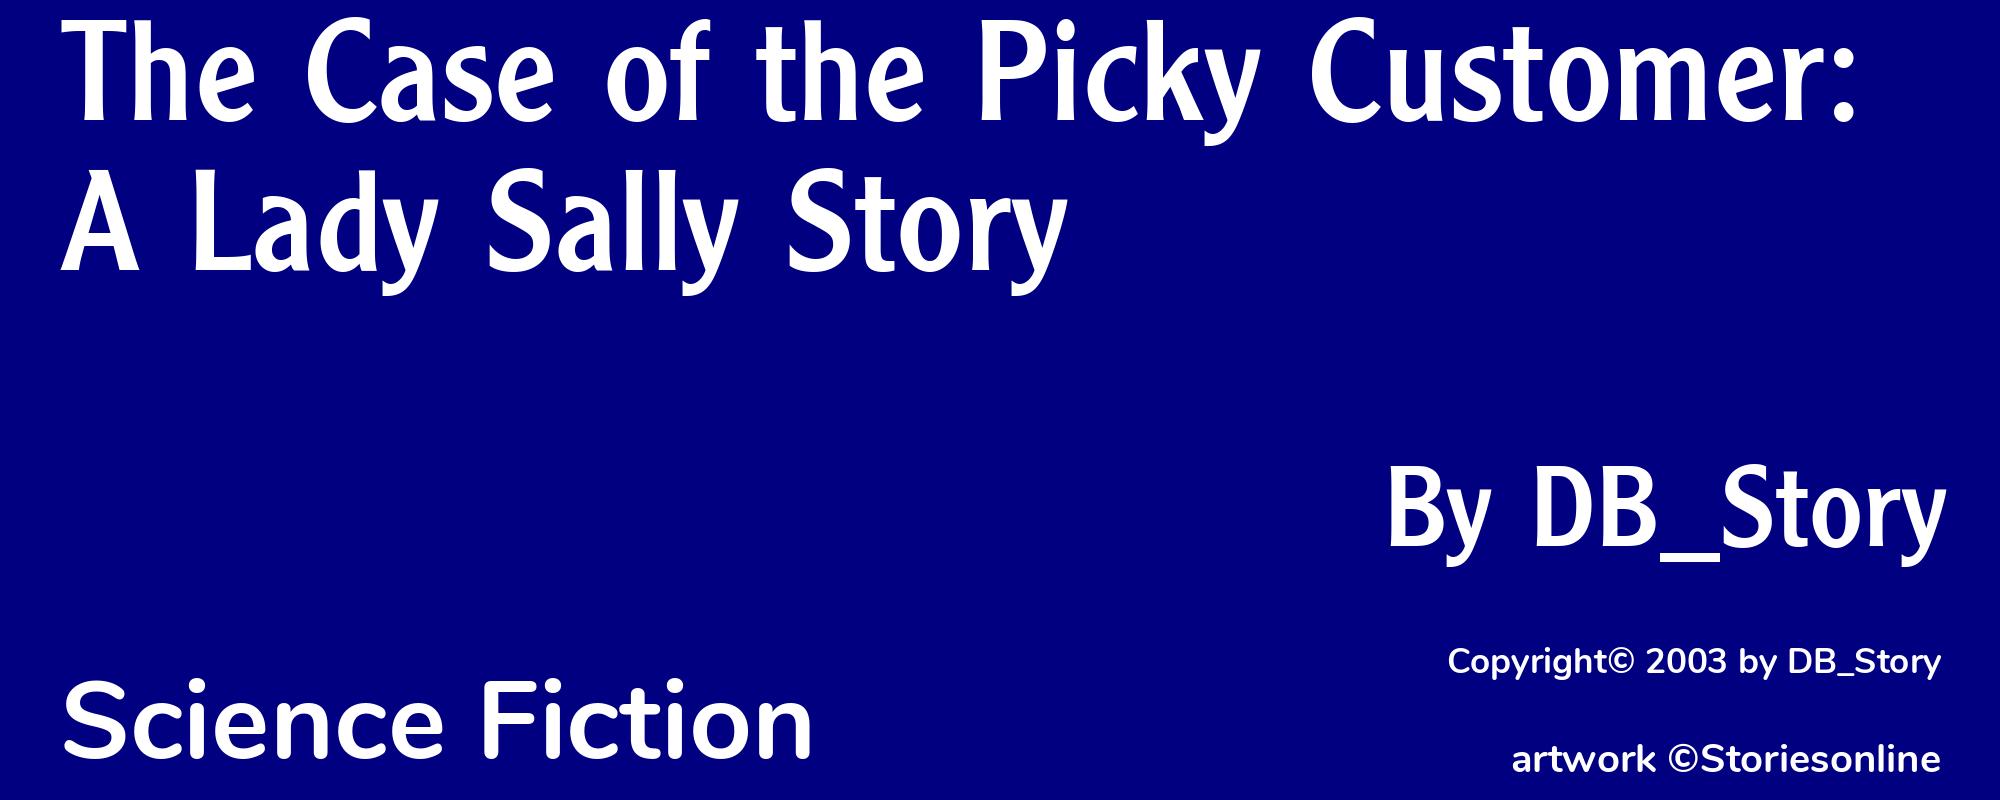 The Case of the Picky Customer: A Lady Sally Story - Cover